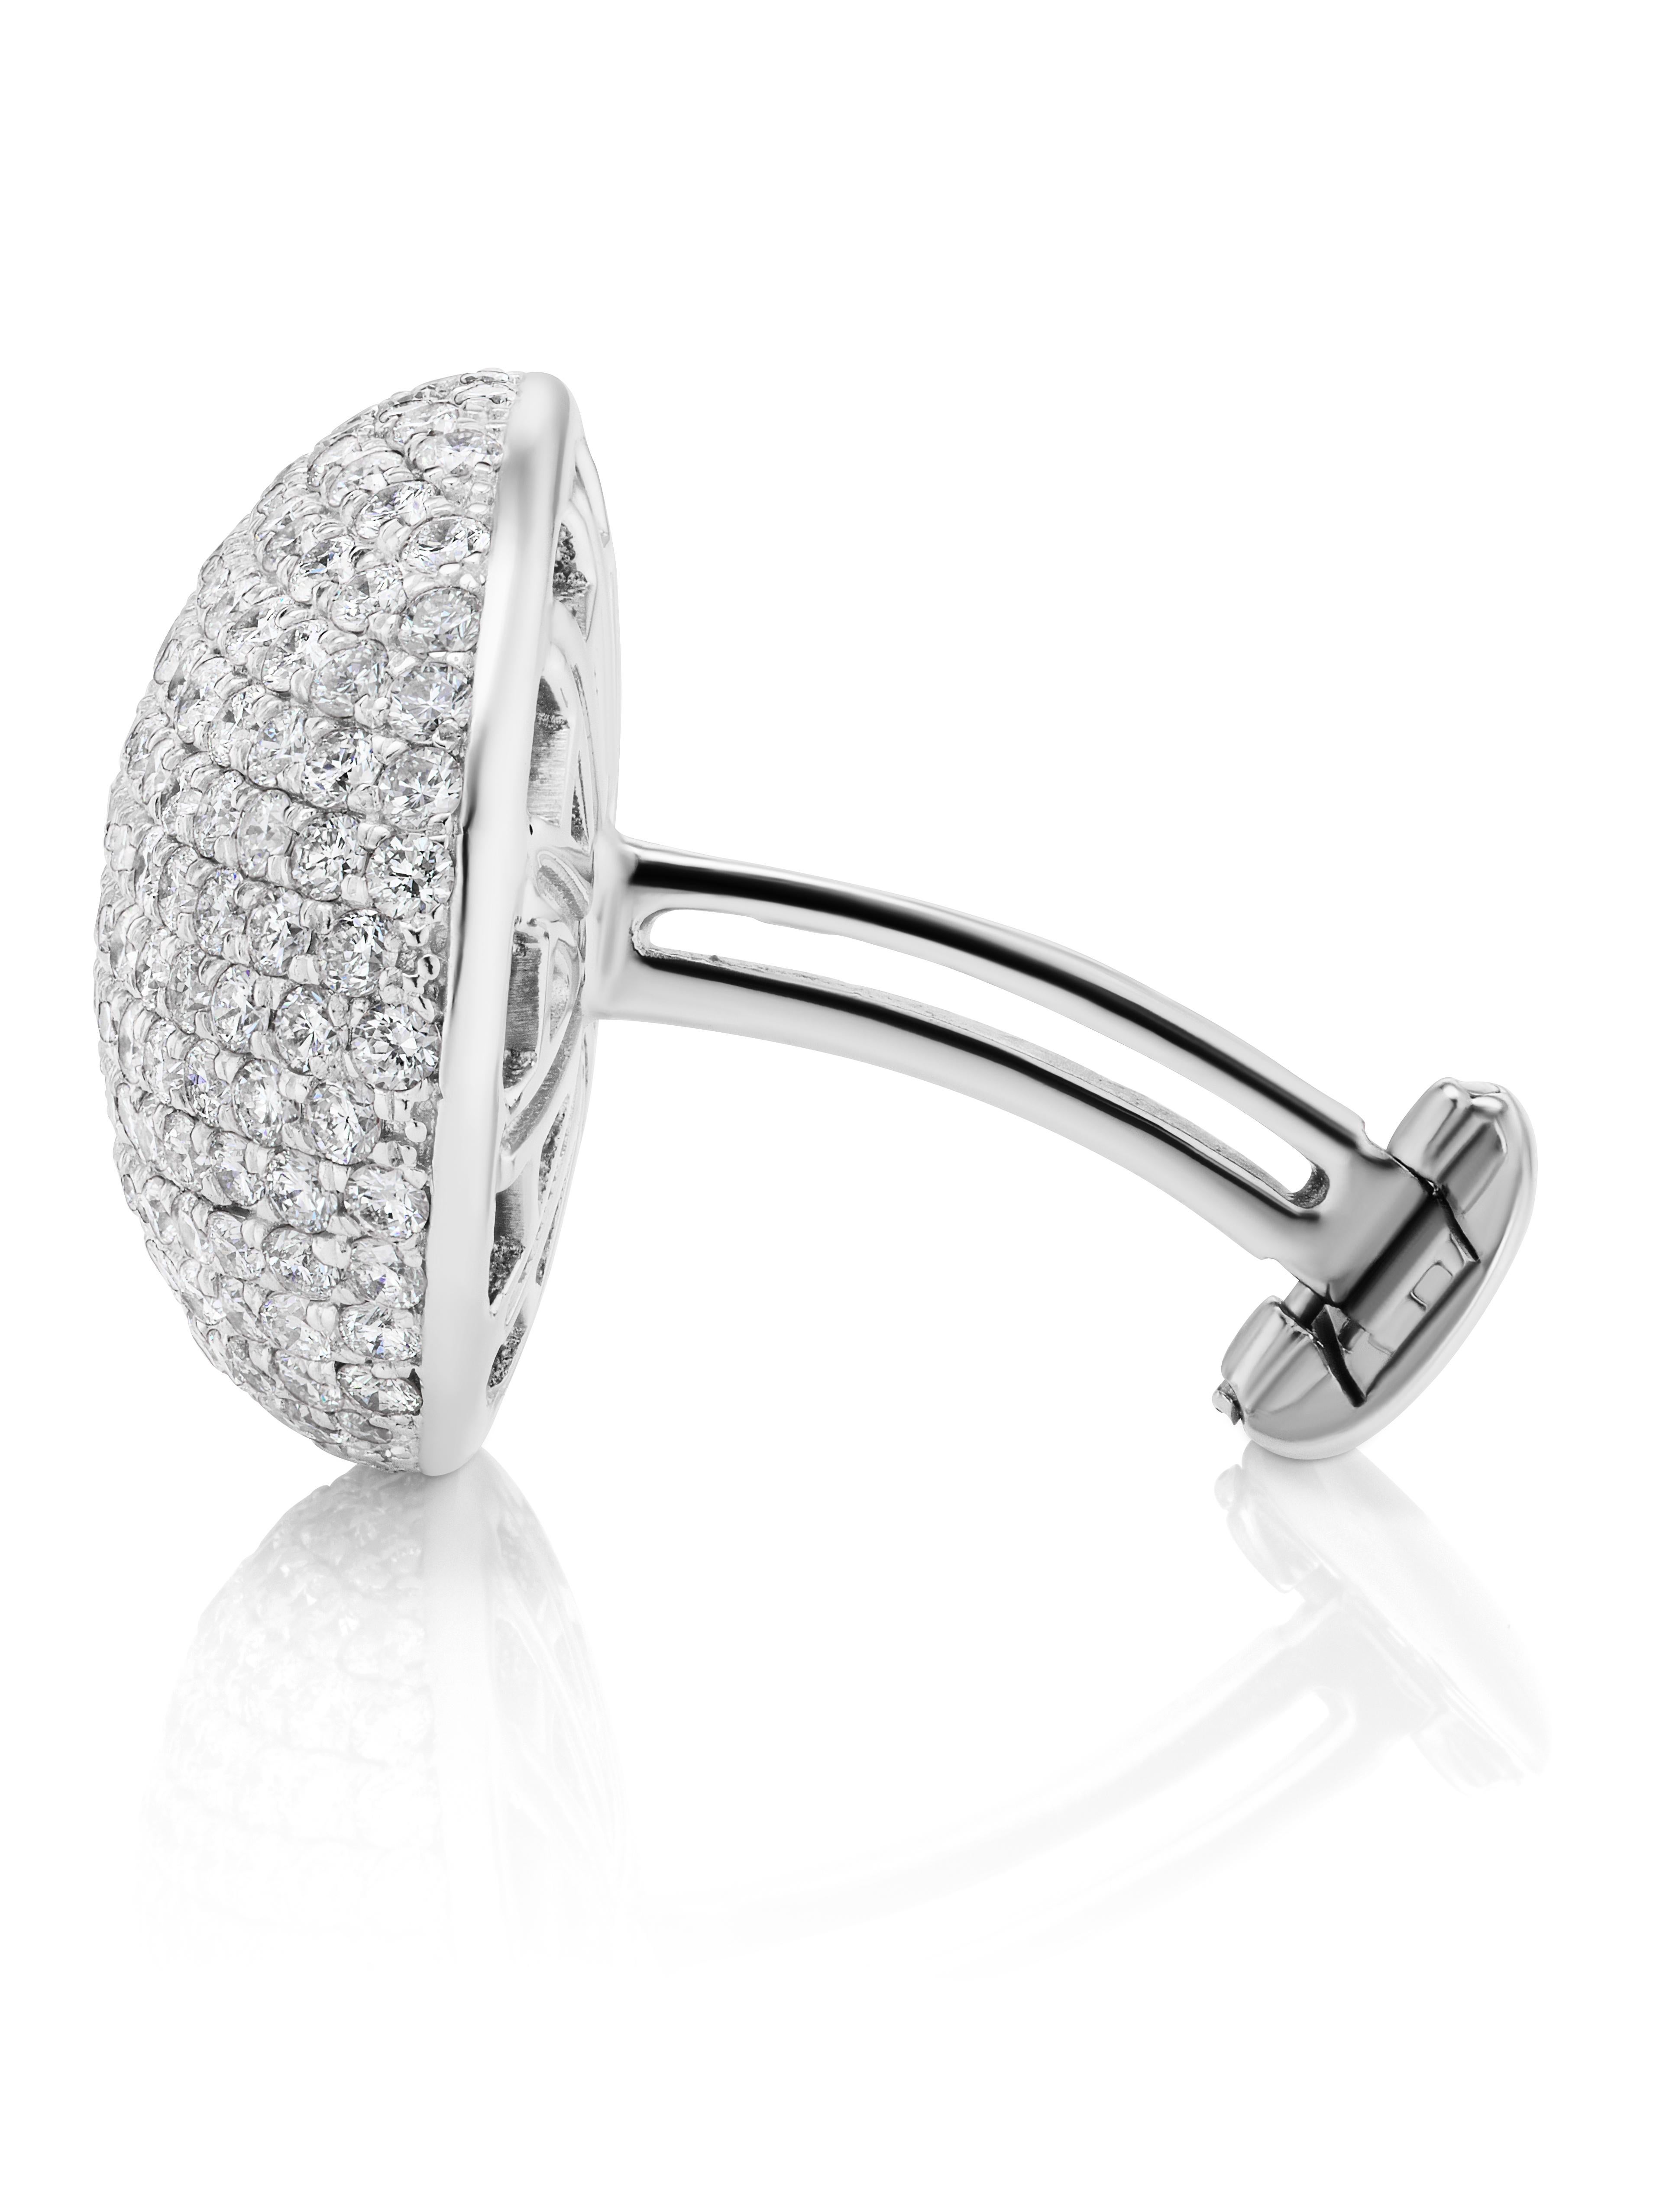 Oval Cufflink with lines of Diamonds set with 256 Round Diamonds weighing 3.67Carats.
Set in 18 Karat White Gold.